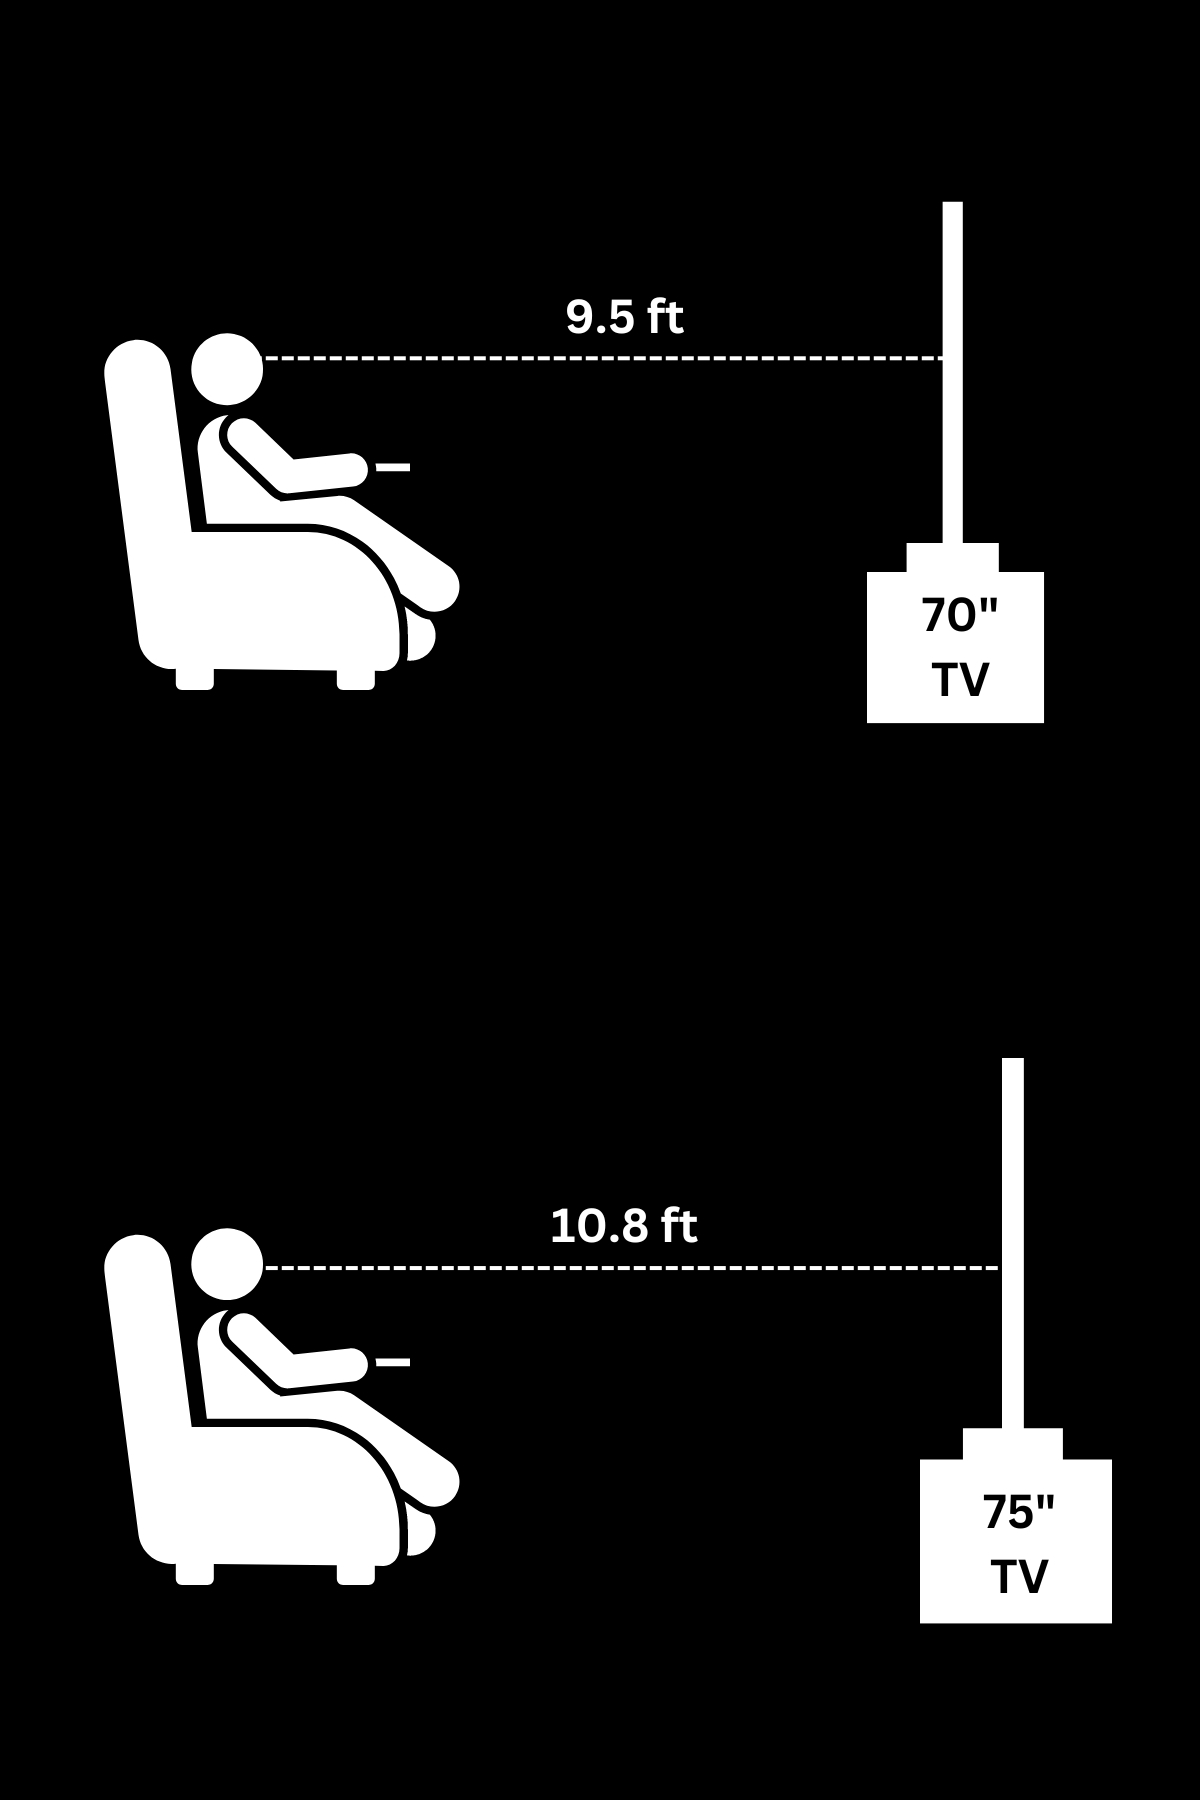 viewing distance of a 75 inch tv and 70 inch tv